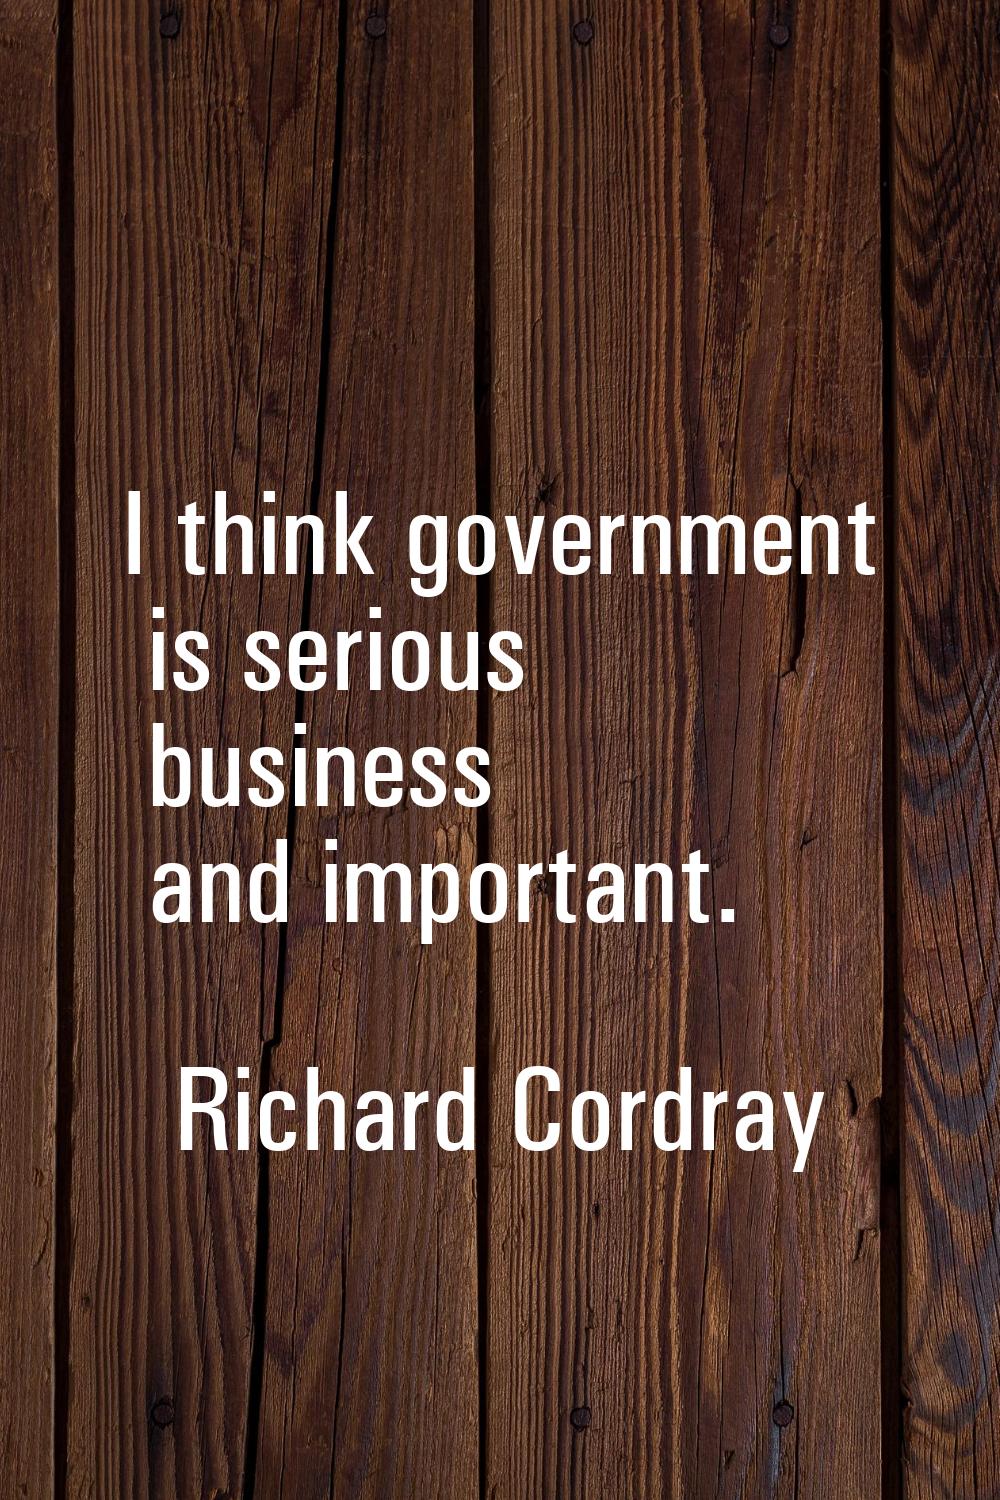 I think government is serious business and important.